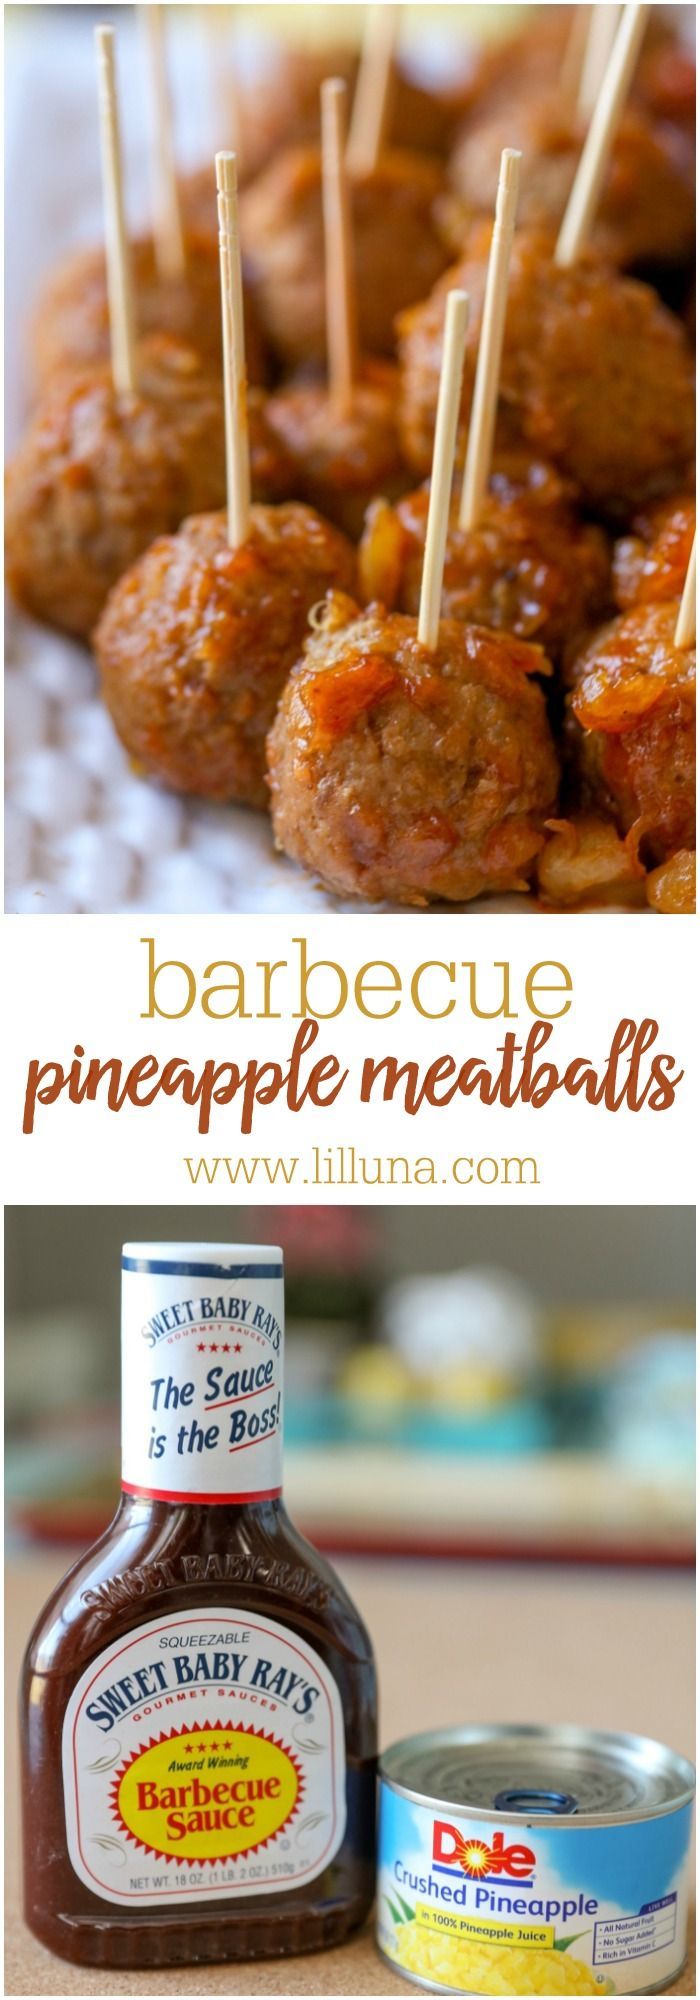 Barbecue Pineapple Meatballs – just 3 ingredients and perfect as an appetizer recipe for parties and get t